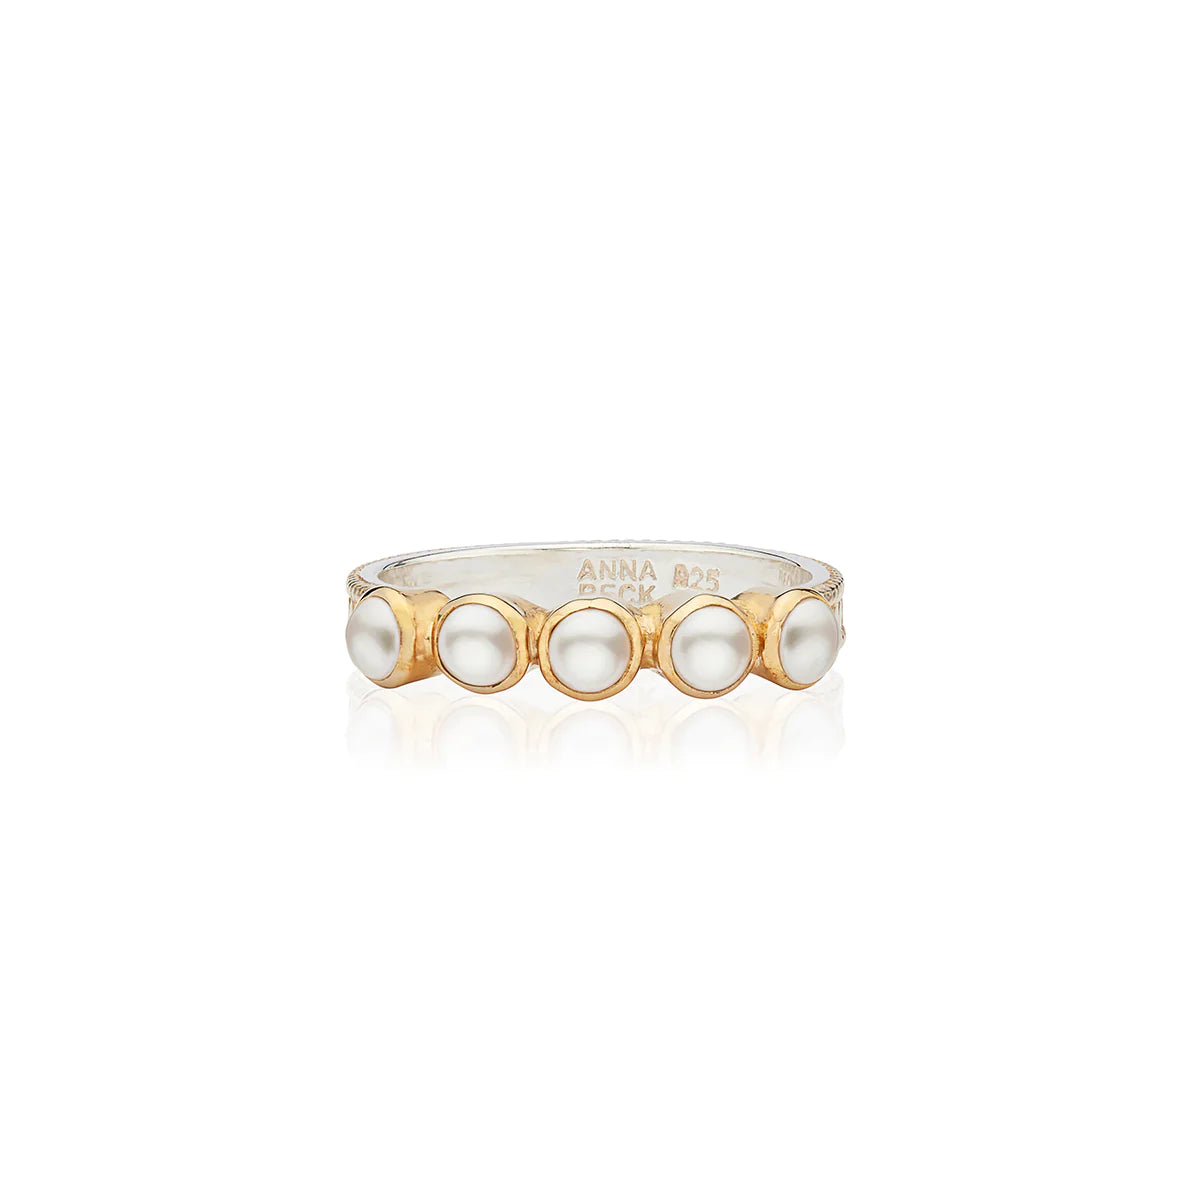 Multi beaded pearl ring with gold dot detail